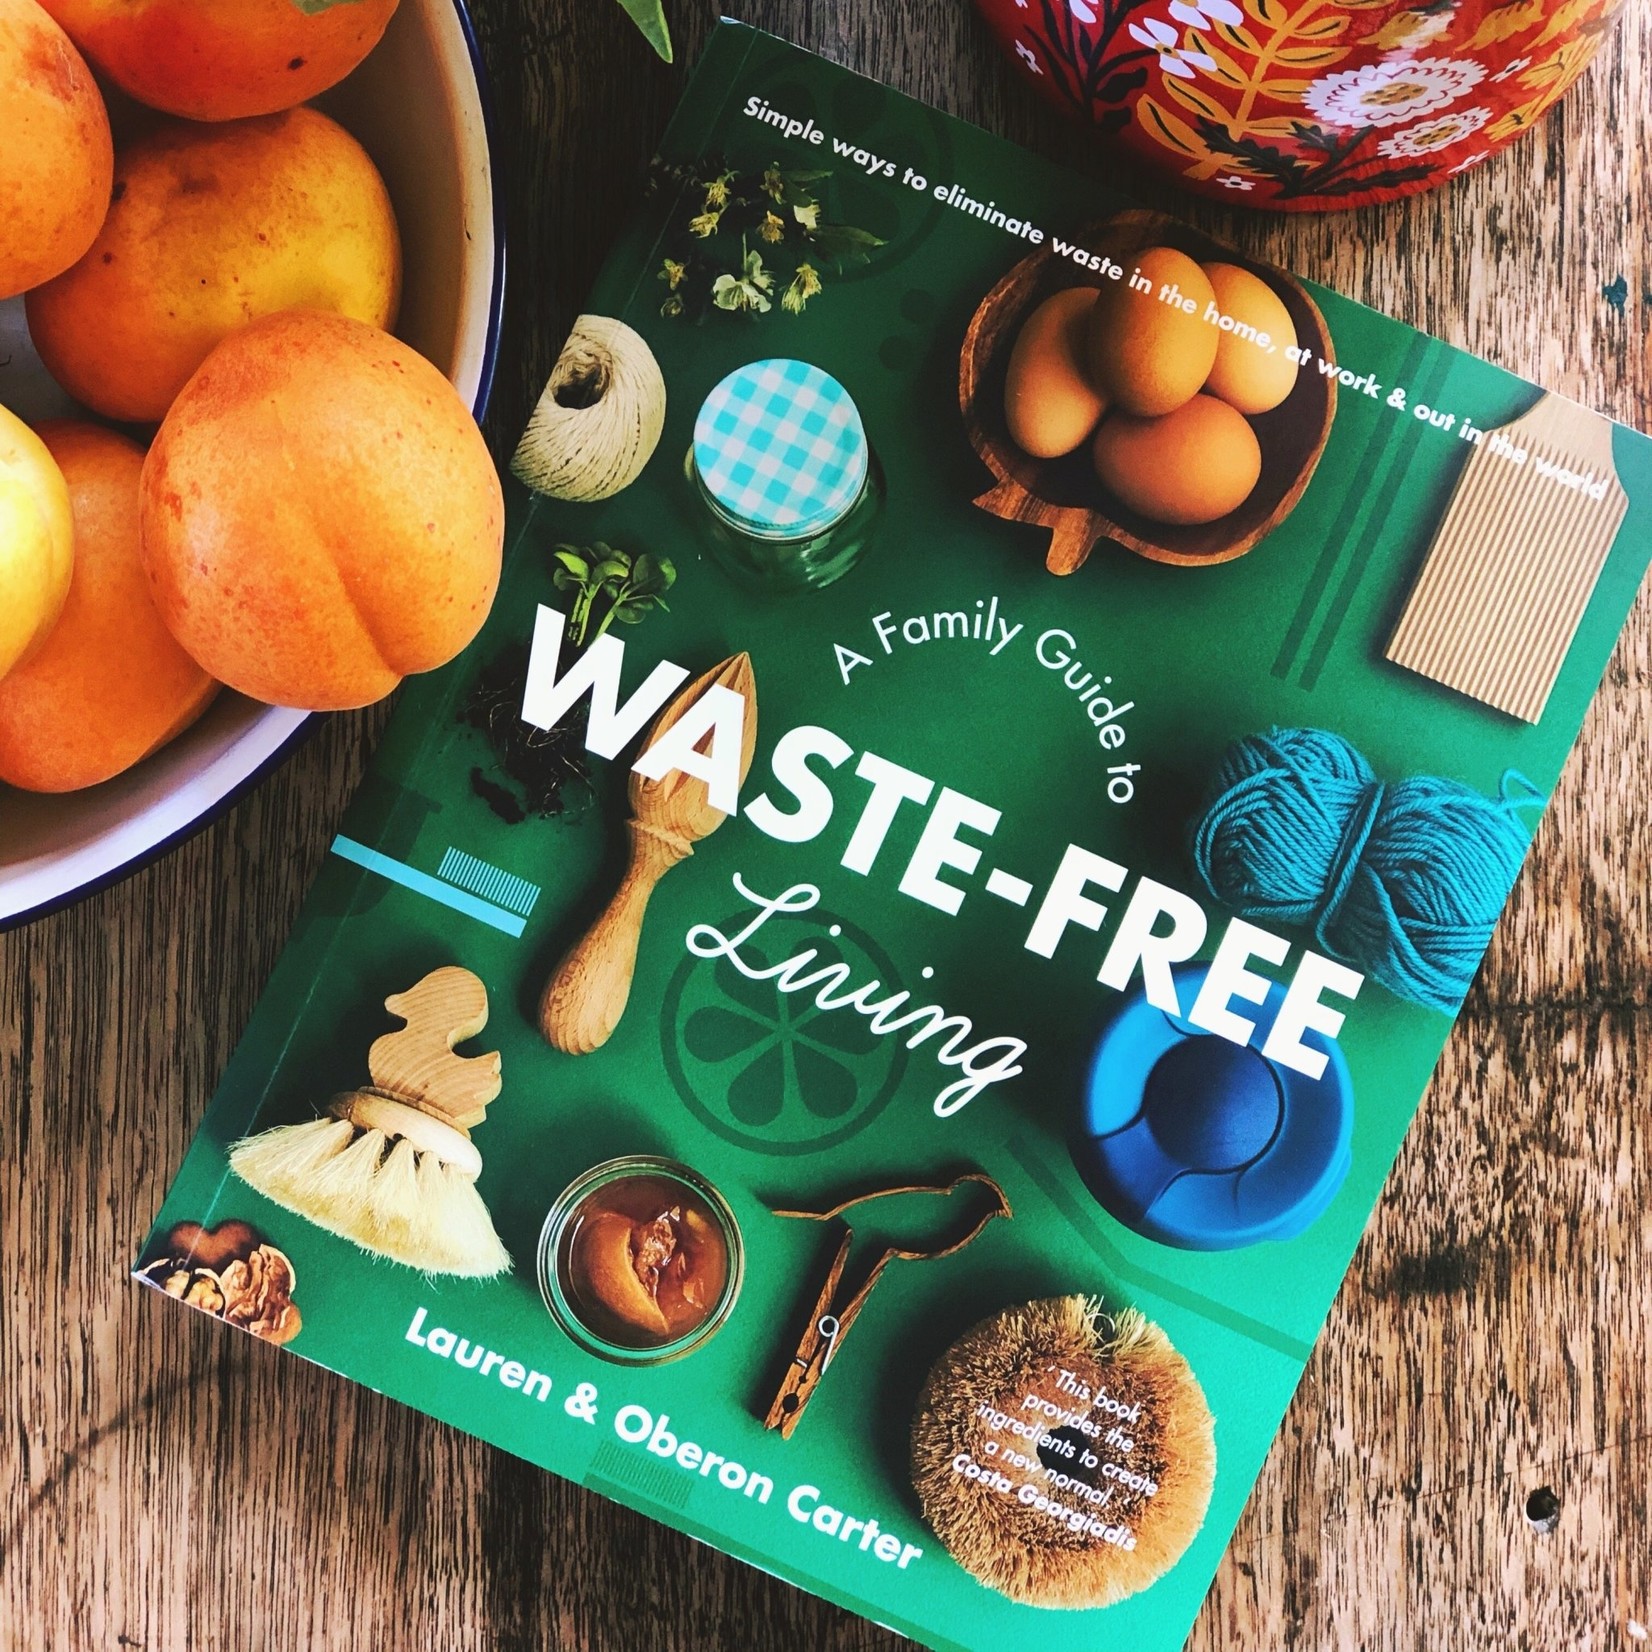 A Family Guide Of Waste Free Living